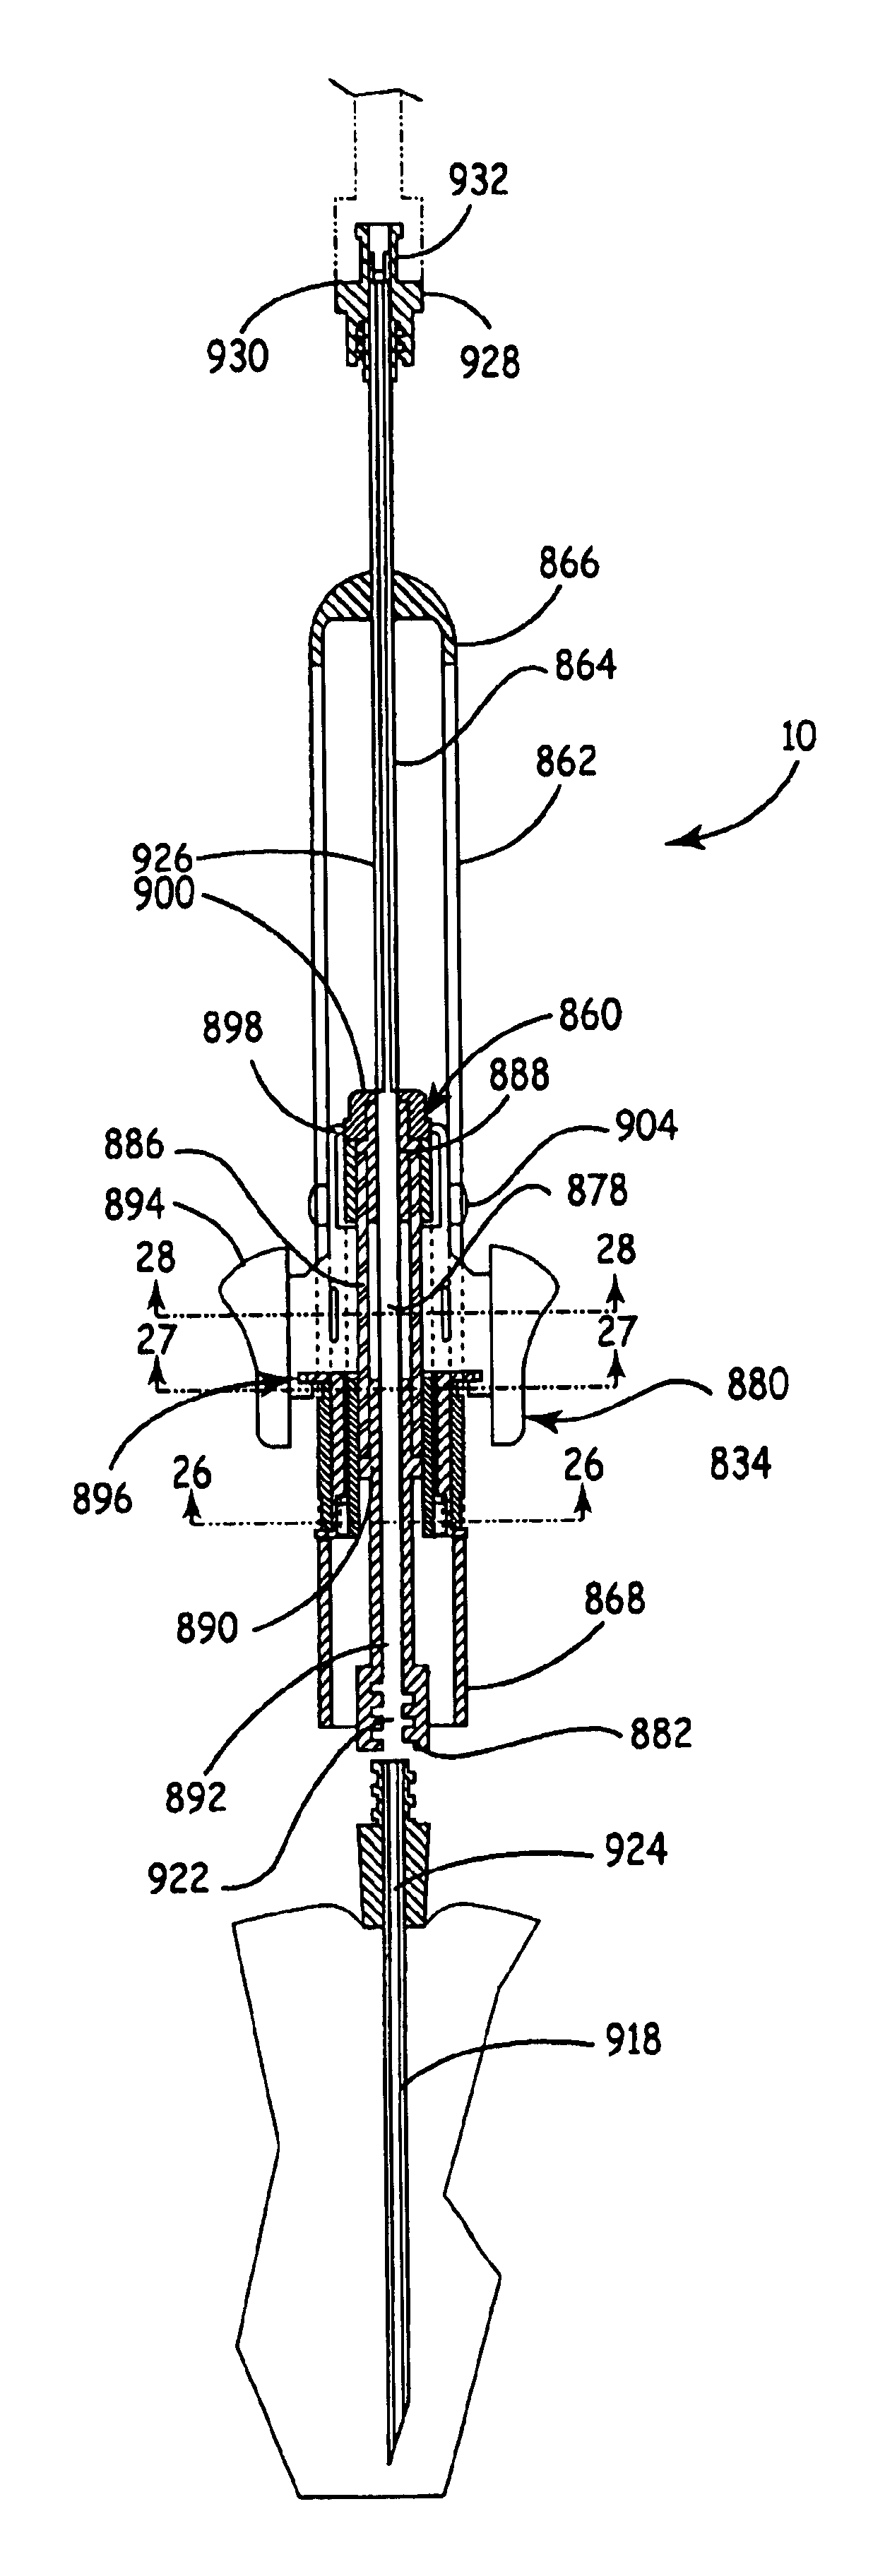 Tissue tract sealing device